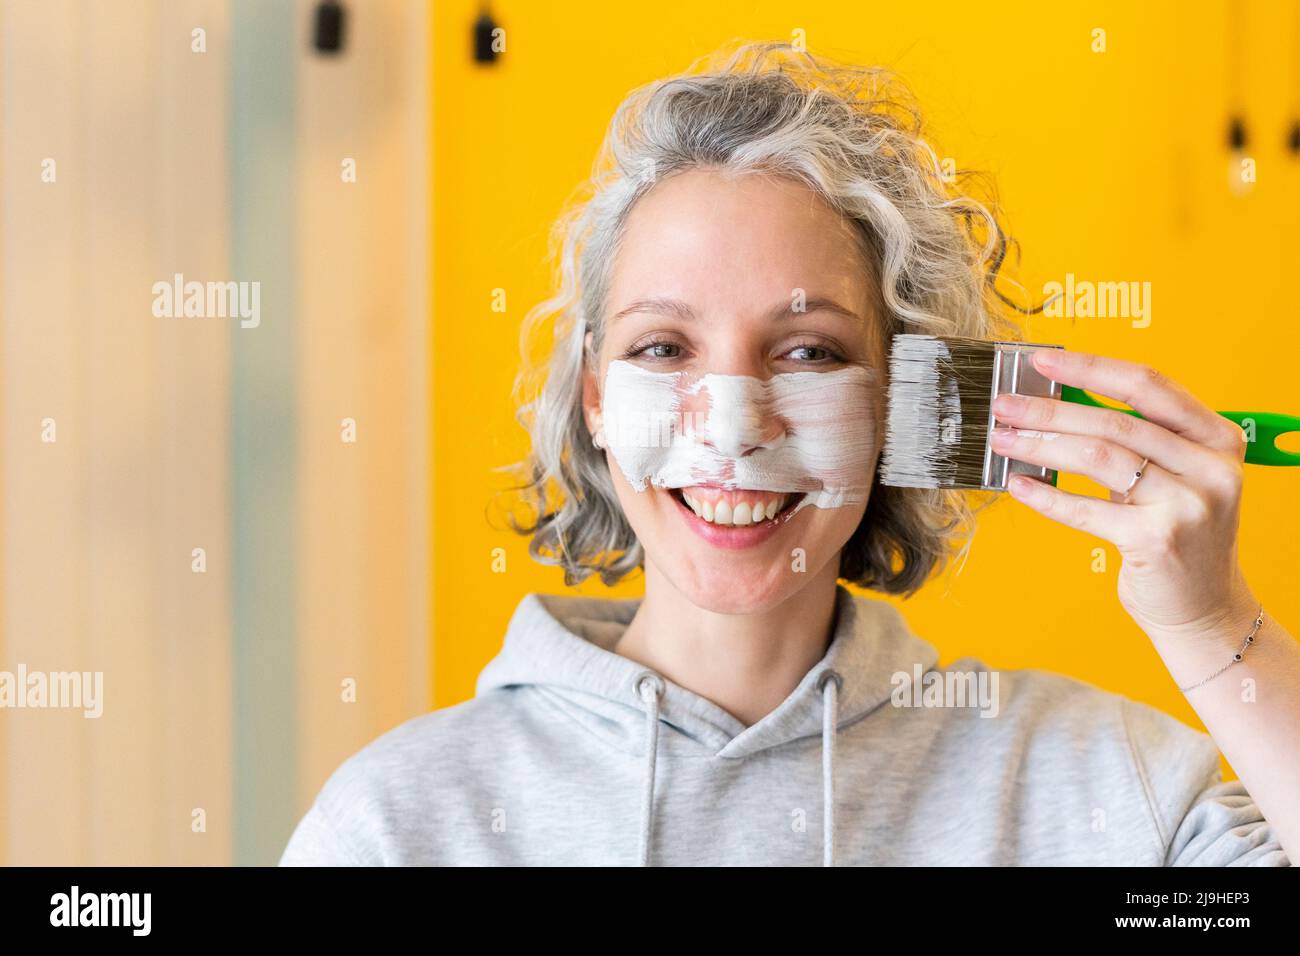 Smiling playful woman applying white paint on face with paintbrush Stock Photo